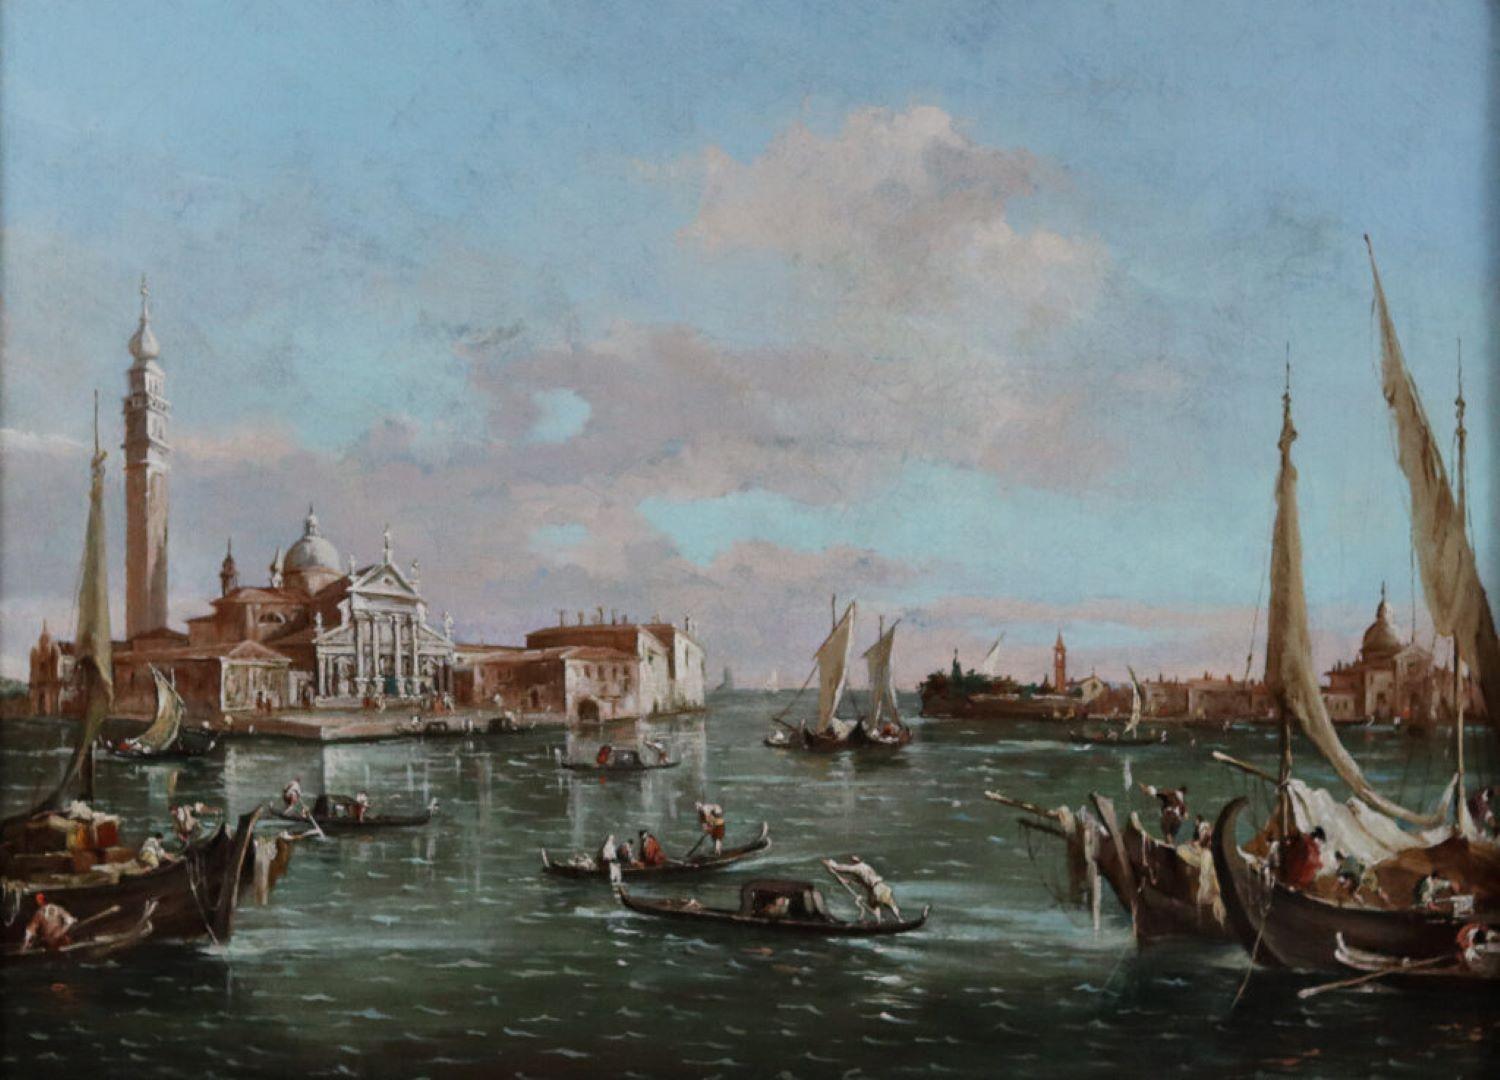 
Style of Francesco Guardi  (1712-1793) 

Venetian Canal Scenes, a pair
-San Giorgio Maggiore from the Bacino di San Marco
-Santa Maria della Salute from the Grand Canal

Oils on canvas: 13 X 18 ¼ in. Frame: 18 ½ x 23 ½ in.  Late 18th / early 19th